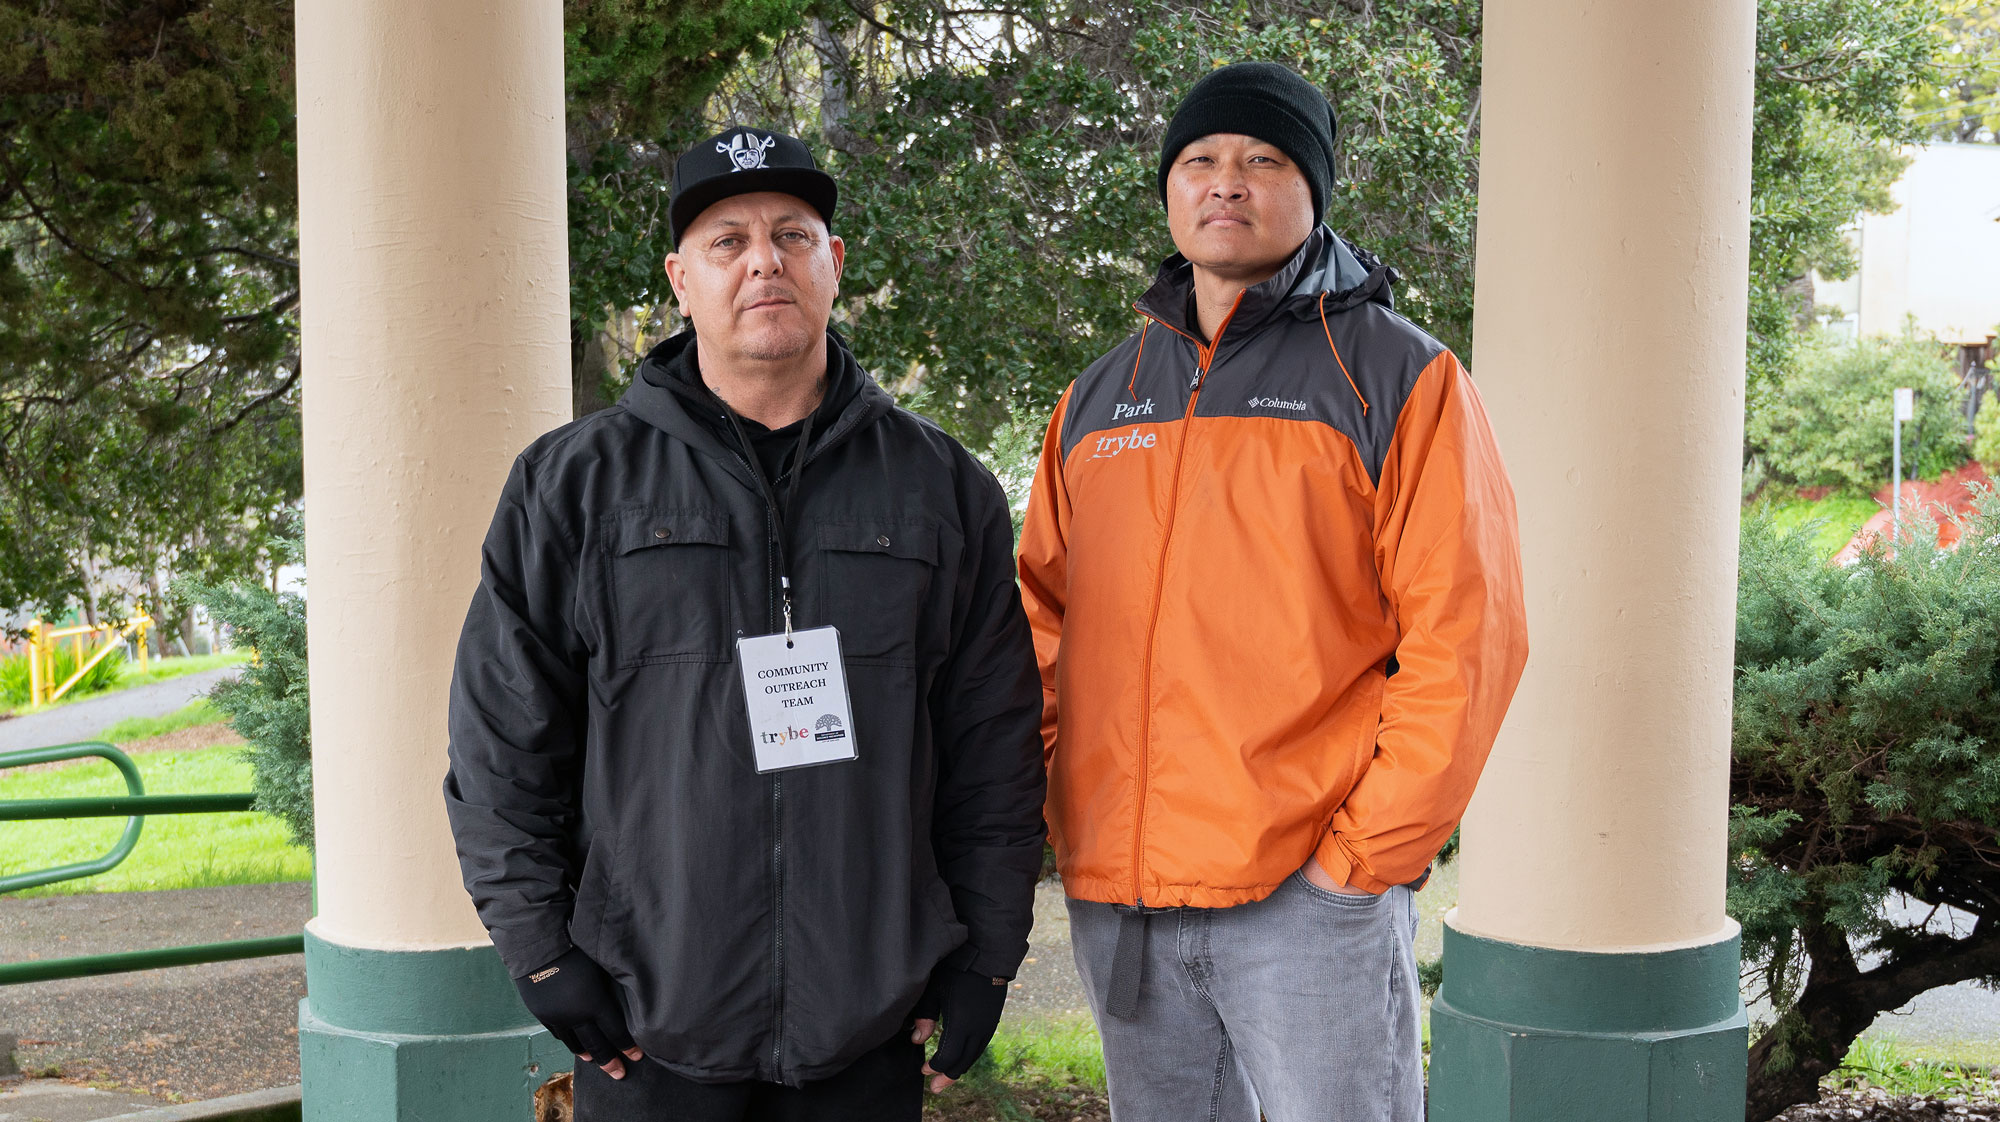 Hector Cruz, at left, stands with Andrew Park in the shelter of a pavilion at San Antonio Park in Oakland